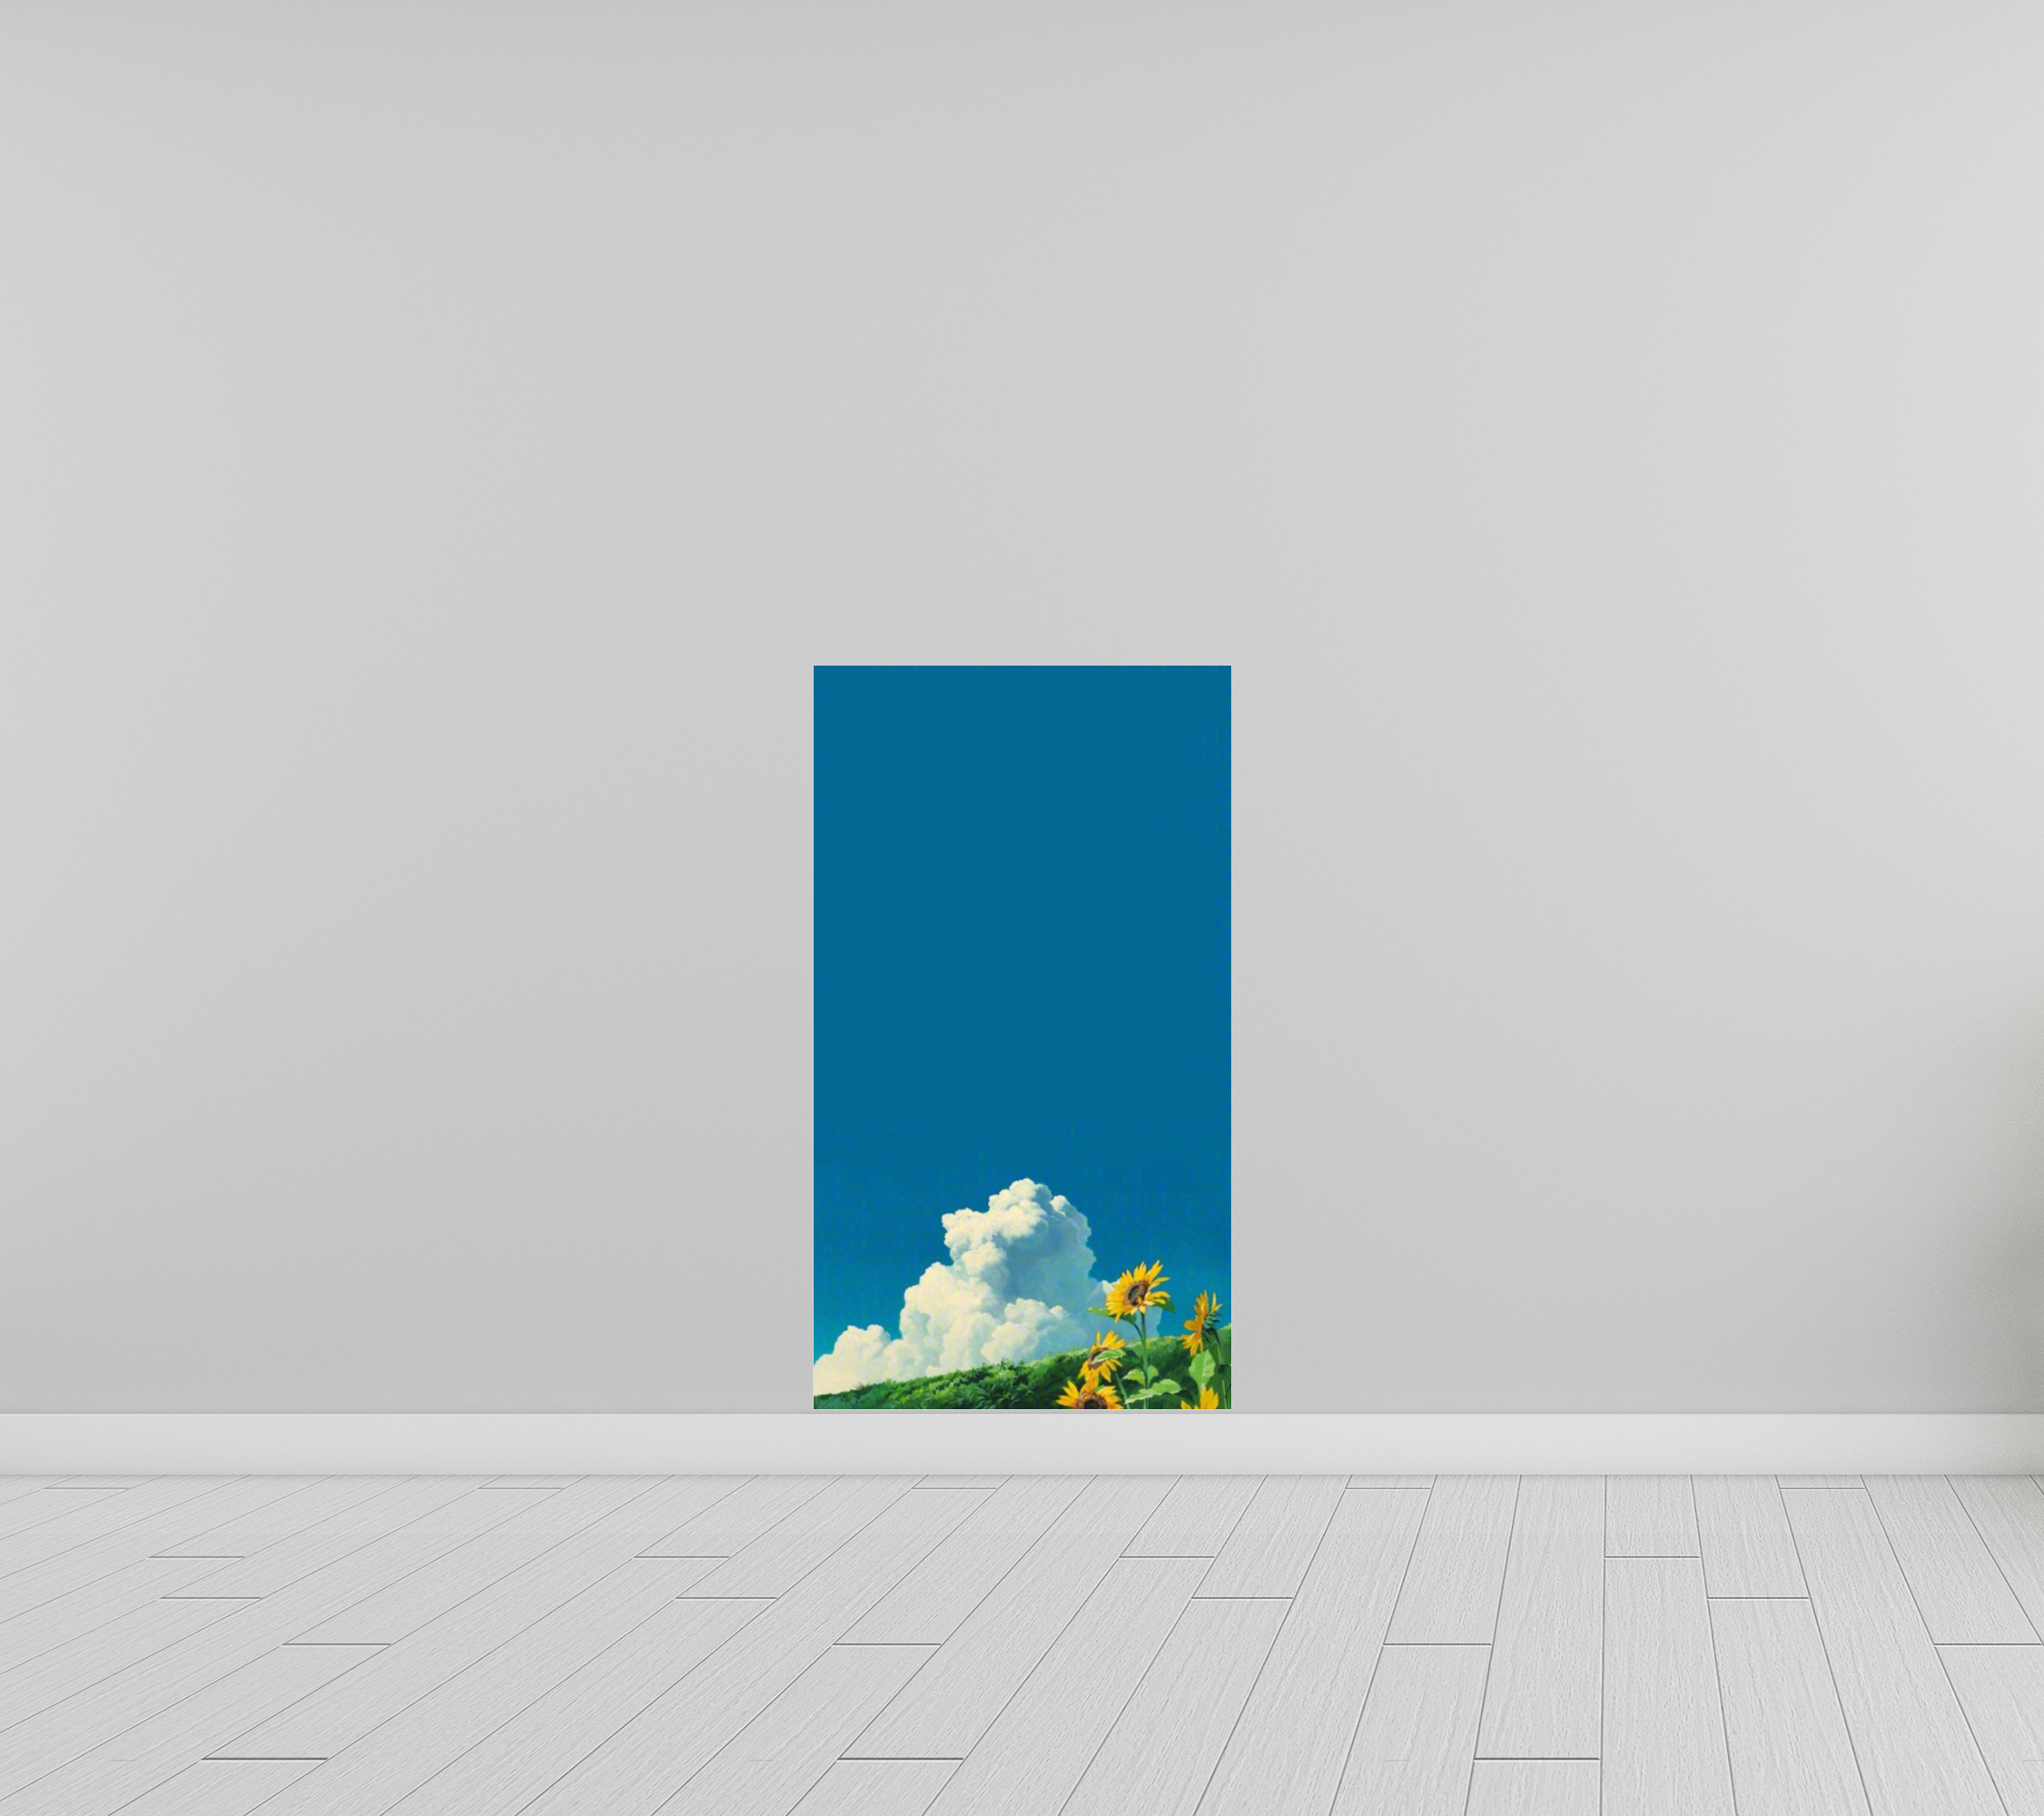 Sunflowers Summer Painting Drawing Simple Room Sky Clouds Minimalism 2251x2000